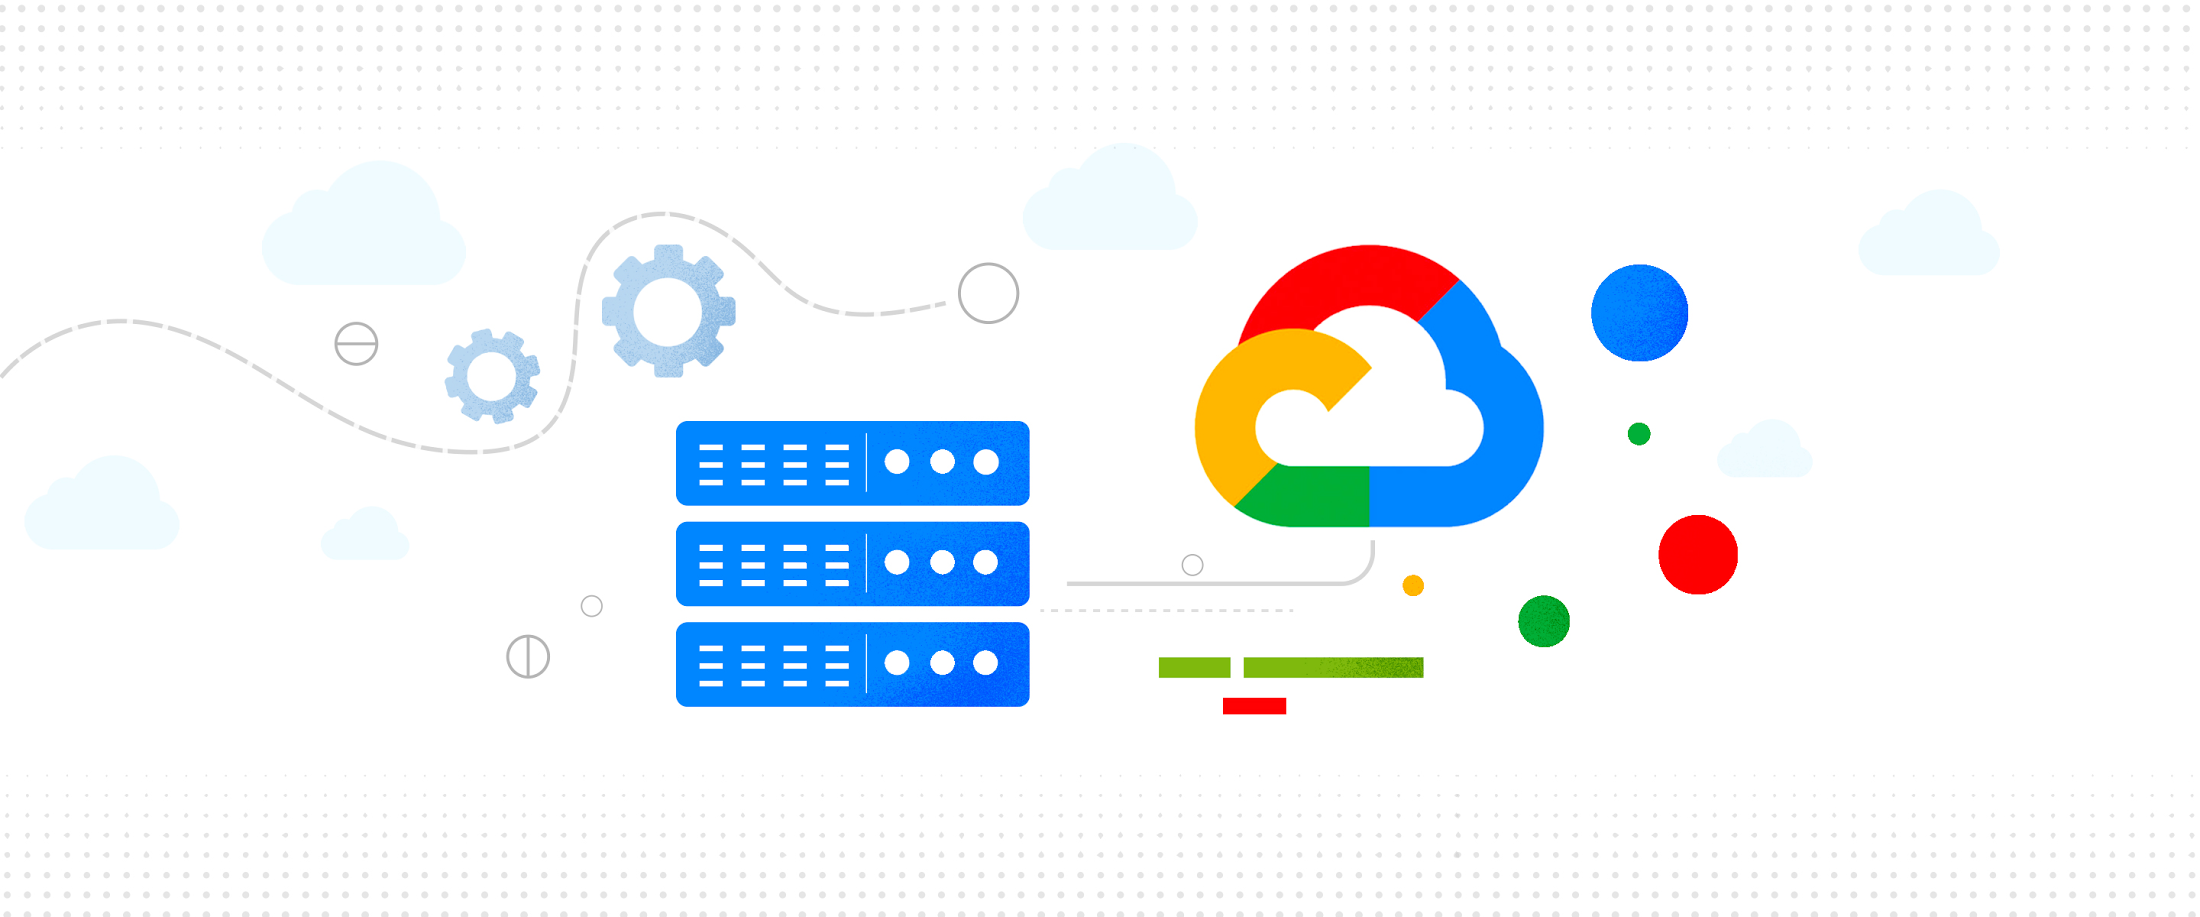 New in Google Cloud VMware Engine: improved reach, networking and scale